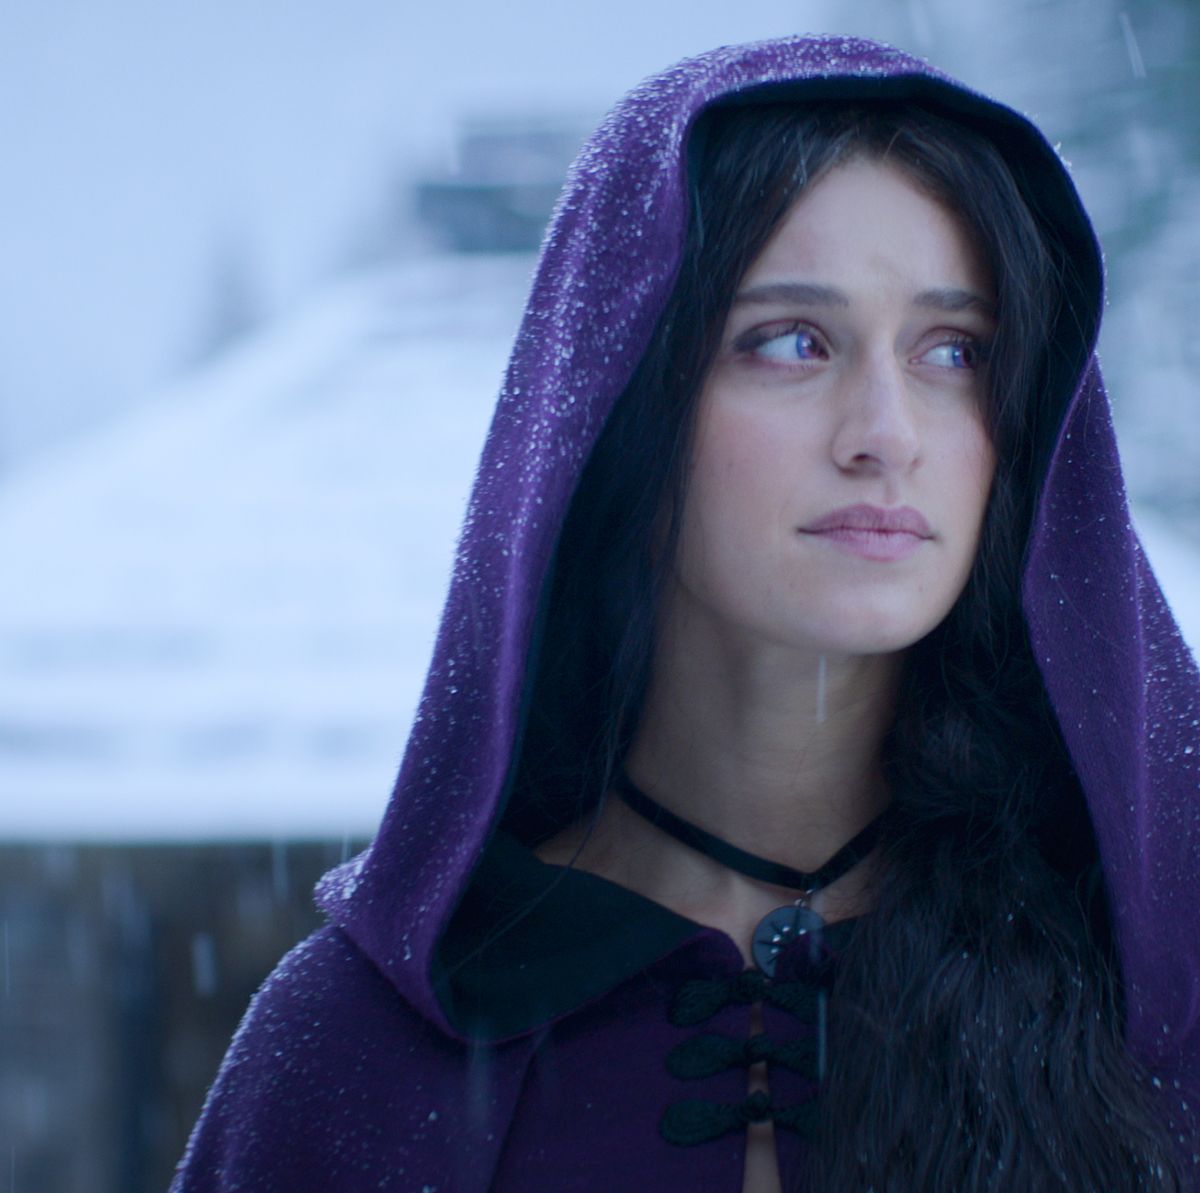 The Witcher Anya Chalotra audition: Yennefer casting was extraordinary